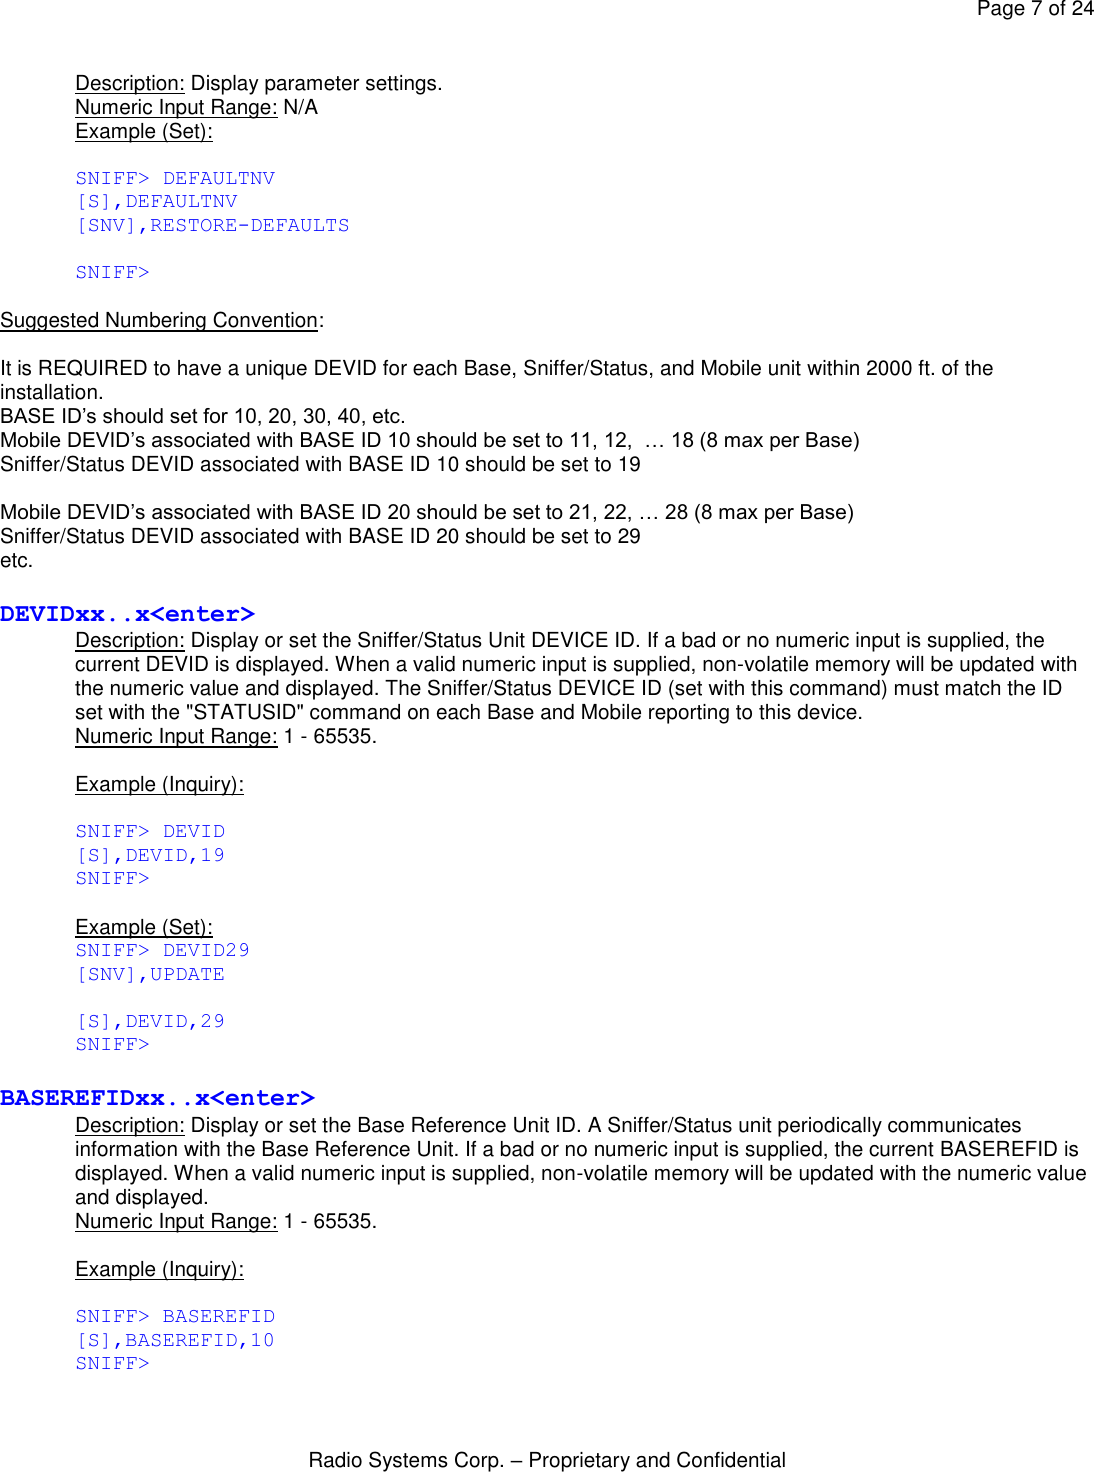 Page 7 of 24 Radio Systems Corp. – Proprietary and Confidential  Description: Display parameter settings. Numeric Input Range: N/A Example (Set):  SNIFF&gt; DEFAULTNV [S],DEFAULTNV [SNV],RESTORE-DEFAULTS  SNIFF&gt;  Suggested Numbering Convention:   It is REQUIRED to have a unique DEVID for each Base, Sniffer/Status, and Mobile unit within 2000 ft. of the installation. BASE ID’s should set for 10, 20, 30, 40, etc. Mobile DEVID’s associated with BASE ID 10 should be set to 11, 12,  … 18 (8 max per Base) Sniffer/Status DEVID associated with BASE ID 10 should be set to 19  Mobile DEVID’s associated with BASE ID 20 should be set to 21, 22, … 28 (8 max per Base) Sniffer/Status DEVID associated with BASE ID 20 should be set to 29 etc.  DEVIDxx..x&lt;enter&gt; Description: Display or set the Sniffer/Status Unit DEVICE ID. If a bad or no numeric input is supplied, the current DEVID is displayed. When a valid numeric input is supplied, non-volatile memory will be updated with the numeric value and displayed. The Sniffer/Status DEVICE ID (set with this command) must match the ID set with the &quot;STATUSID&quot; command on each Base and Mobile reporting to this device. Numeric Input Range: 1 - 65535.  Example (Inquiry):  SNIFF&gt; DEVID [S],DEVID,19 SNIFF&gt;  Example (Set): SNIFF&gt; DEVID29 [SNV],UPDATE  [S],DEVID,29 SNIFF&gt;  BASEREFIDxx..x&lt;enter&gt; Description: Display or set the Base Reference Unit ID. A Sniffer/Status unit periodically communicates information with the Base Reference Unit. If a bad or no numeric input is supplied, the current BASEREFID is displayed. When a valid numeric input is supplied, non-volatile memory will be updated with the numeric value and displayed.  Numeric Input Range: 1 - 65535.  Example (Inquiry):  SNIFF&gt; BASEREFID [S],BASEREFID,10 SNIFF&gt;  